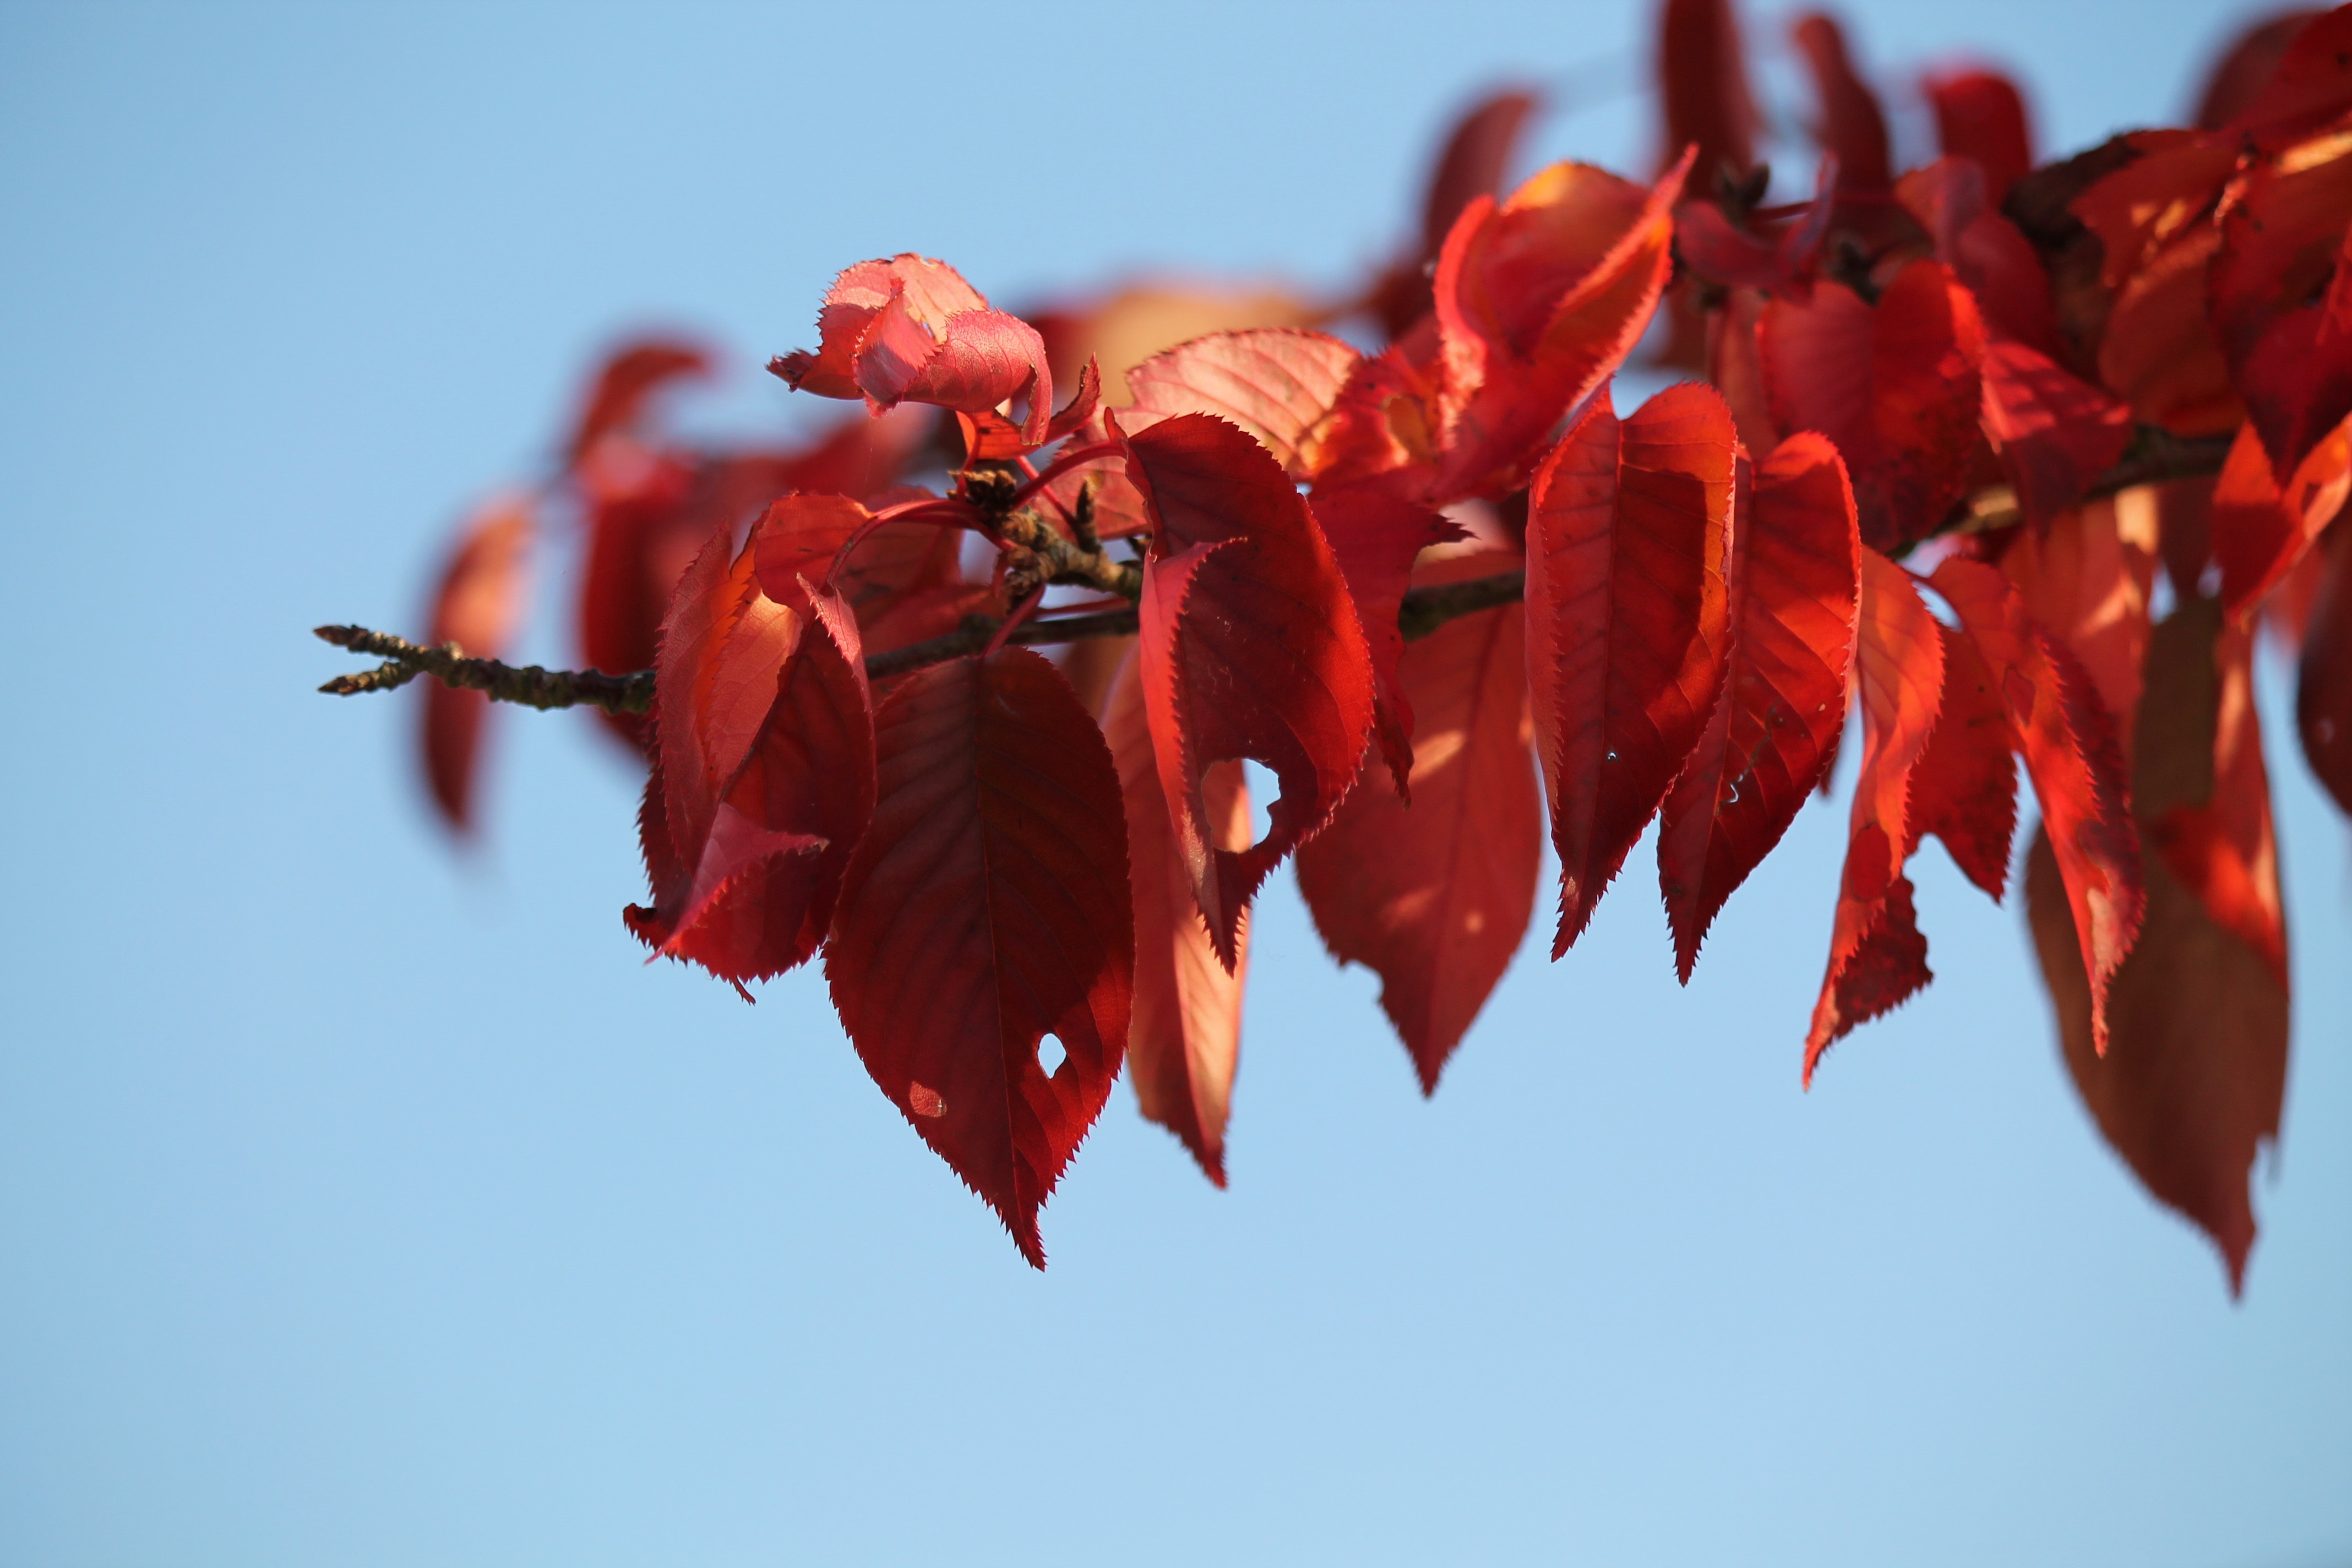 Autumn, Autumn Mood, Red, Leaves, Emerge, red, autumn